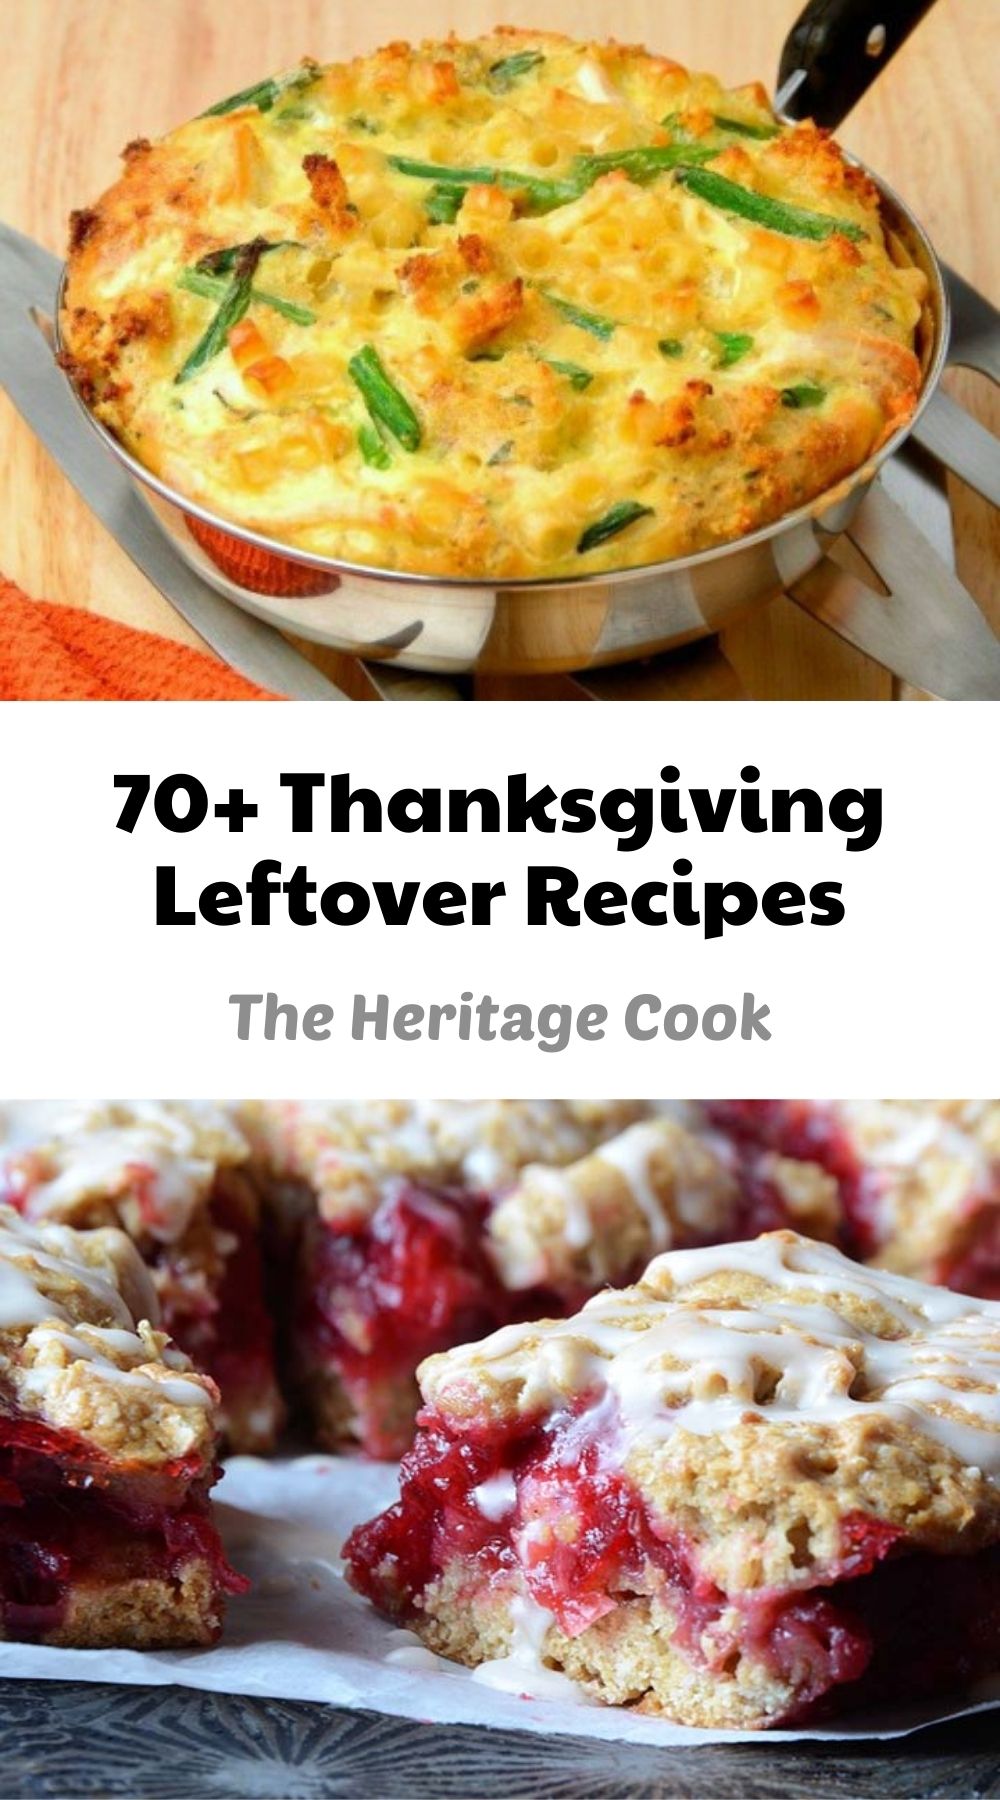 Collection of 70+Thanksgiving Leftover Recipes 2021 Assembled by Jane Bonacci, The Heritage Cook